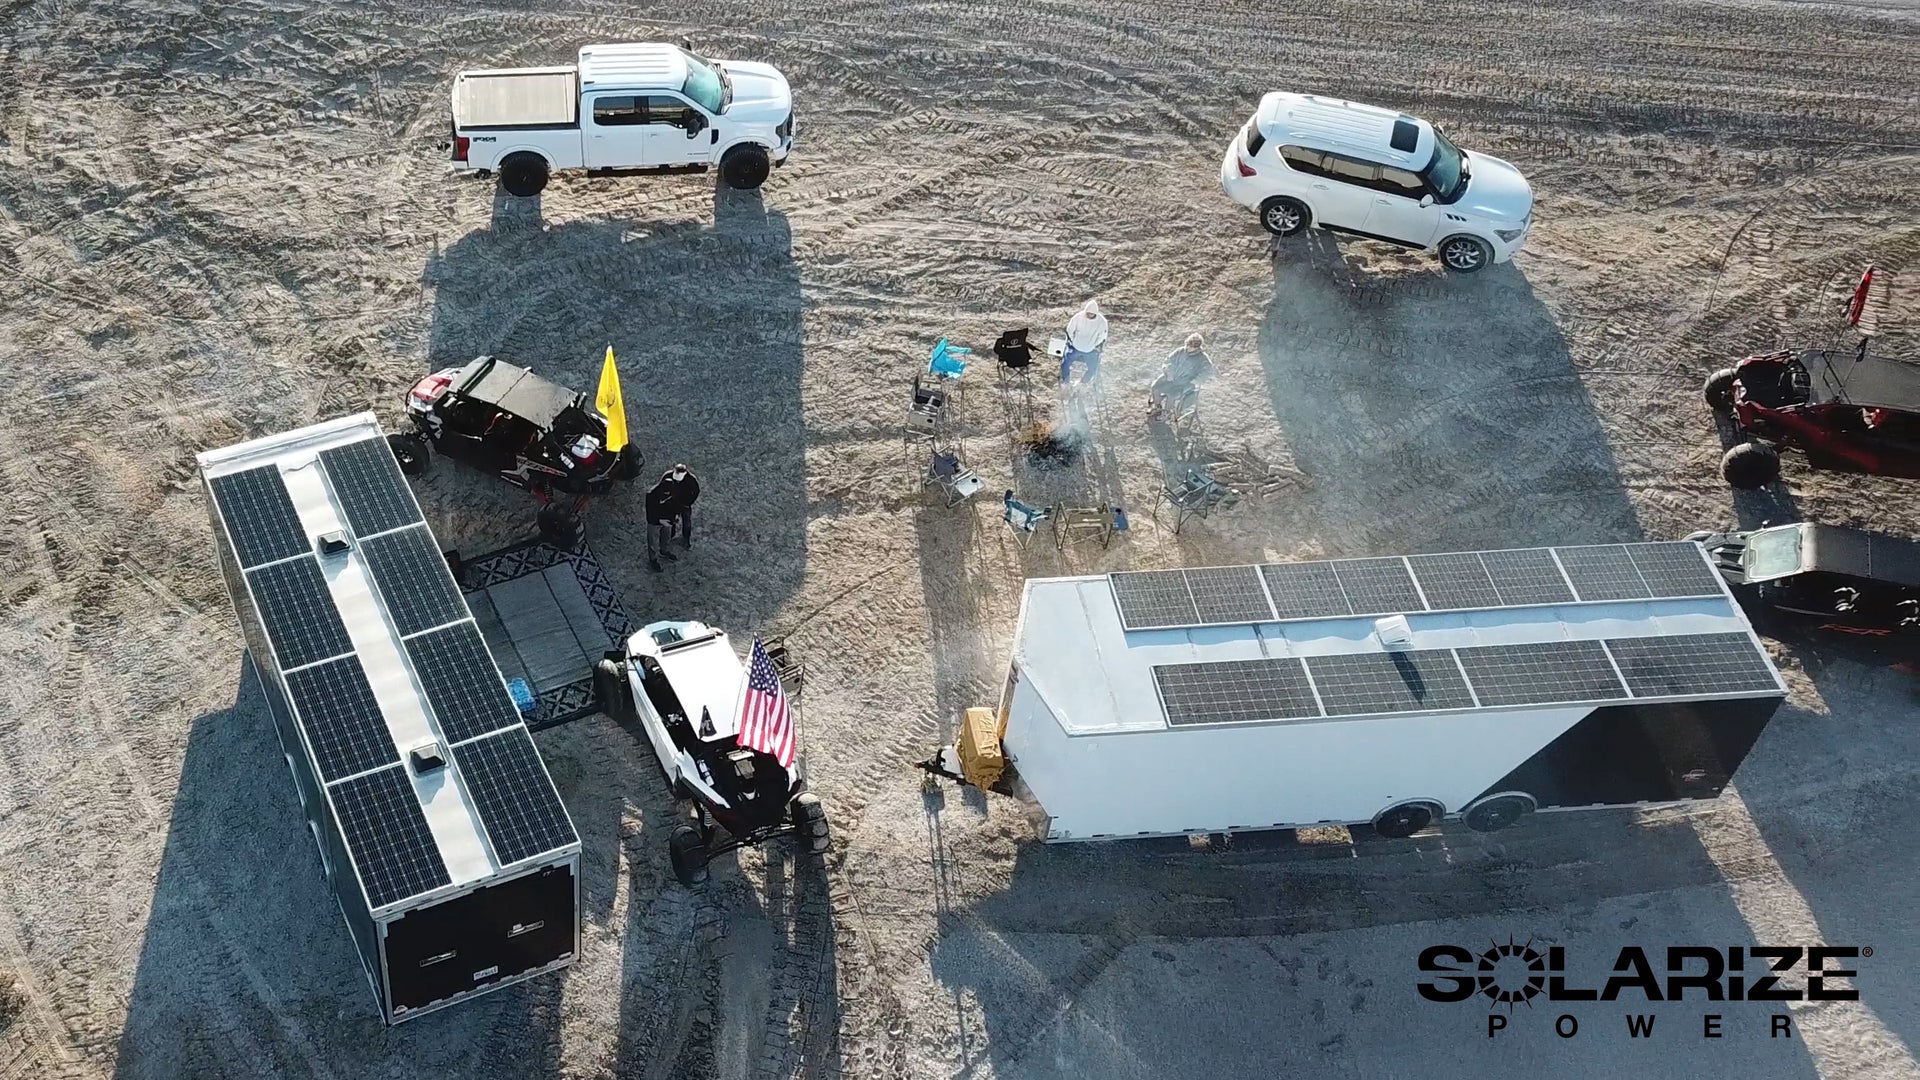 Load video: Solarize Power has developed a comprehensive easy-to-install bolt-on Solar Power System for trailers. This eco-friendly, energy-efficient solar power system is a cost-effective way of generating reliable, clean power for enclosed cargo trailers and semi-trailers. The uses for this mobile and environmentally friendly power system are nearly limitless, including clean off-grid power for RVs, campers, backup for disaster preparedness, air conditioning, heating, charging phones, refrigeration, lighting, tools, equipment, construction, medical equipment, communication equipment, food trucks. Solar Power System’s control unit contains an inverter, battery, wiring, and solar panels for an easy to understand install. Go off grid without a noisy gas generator.